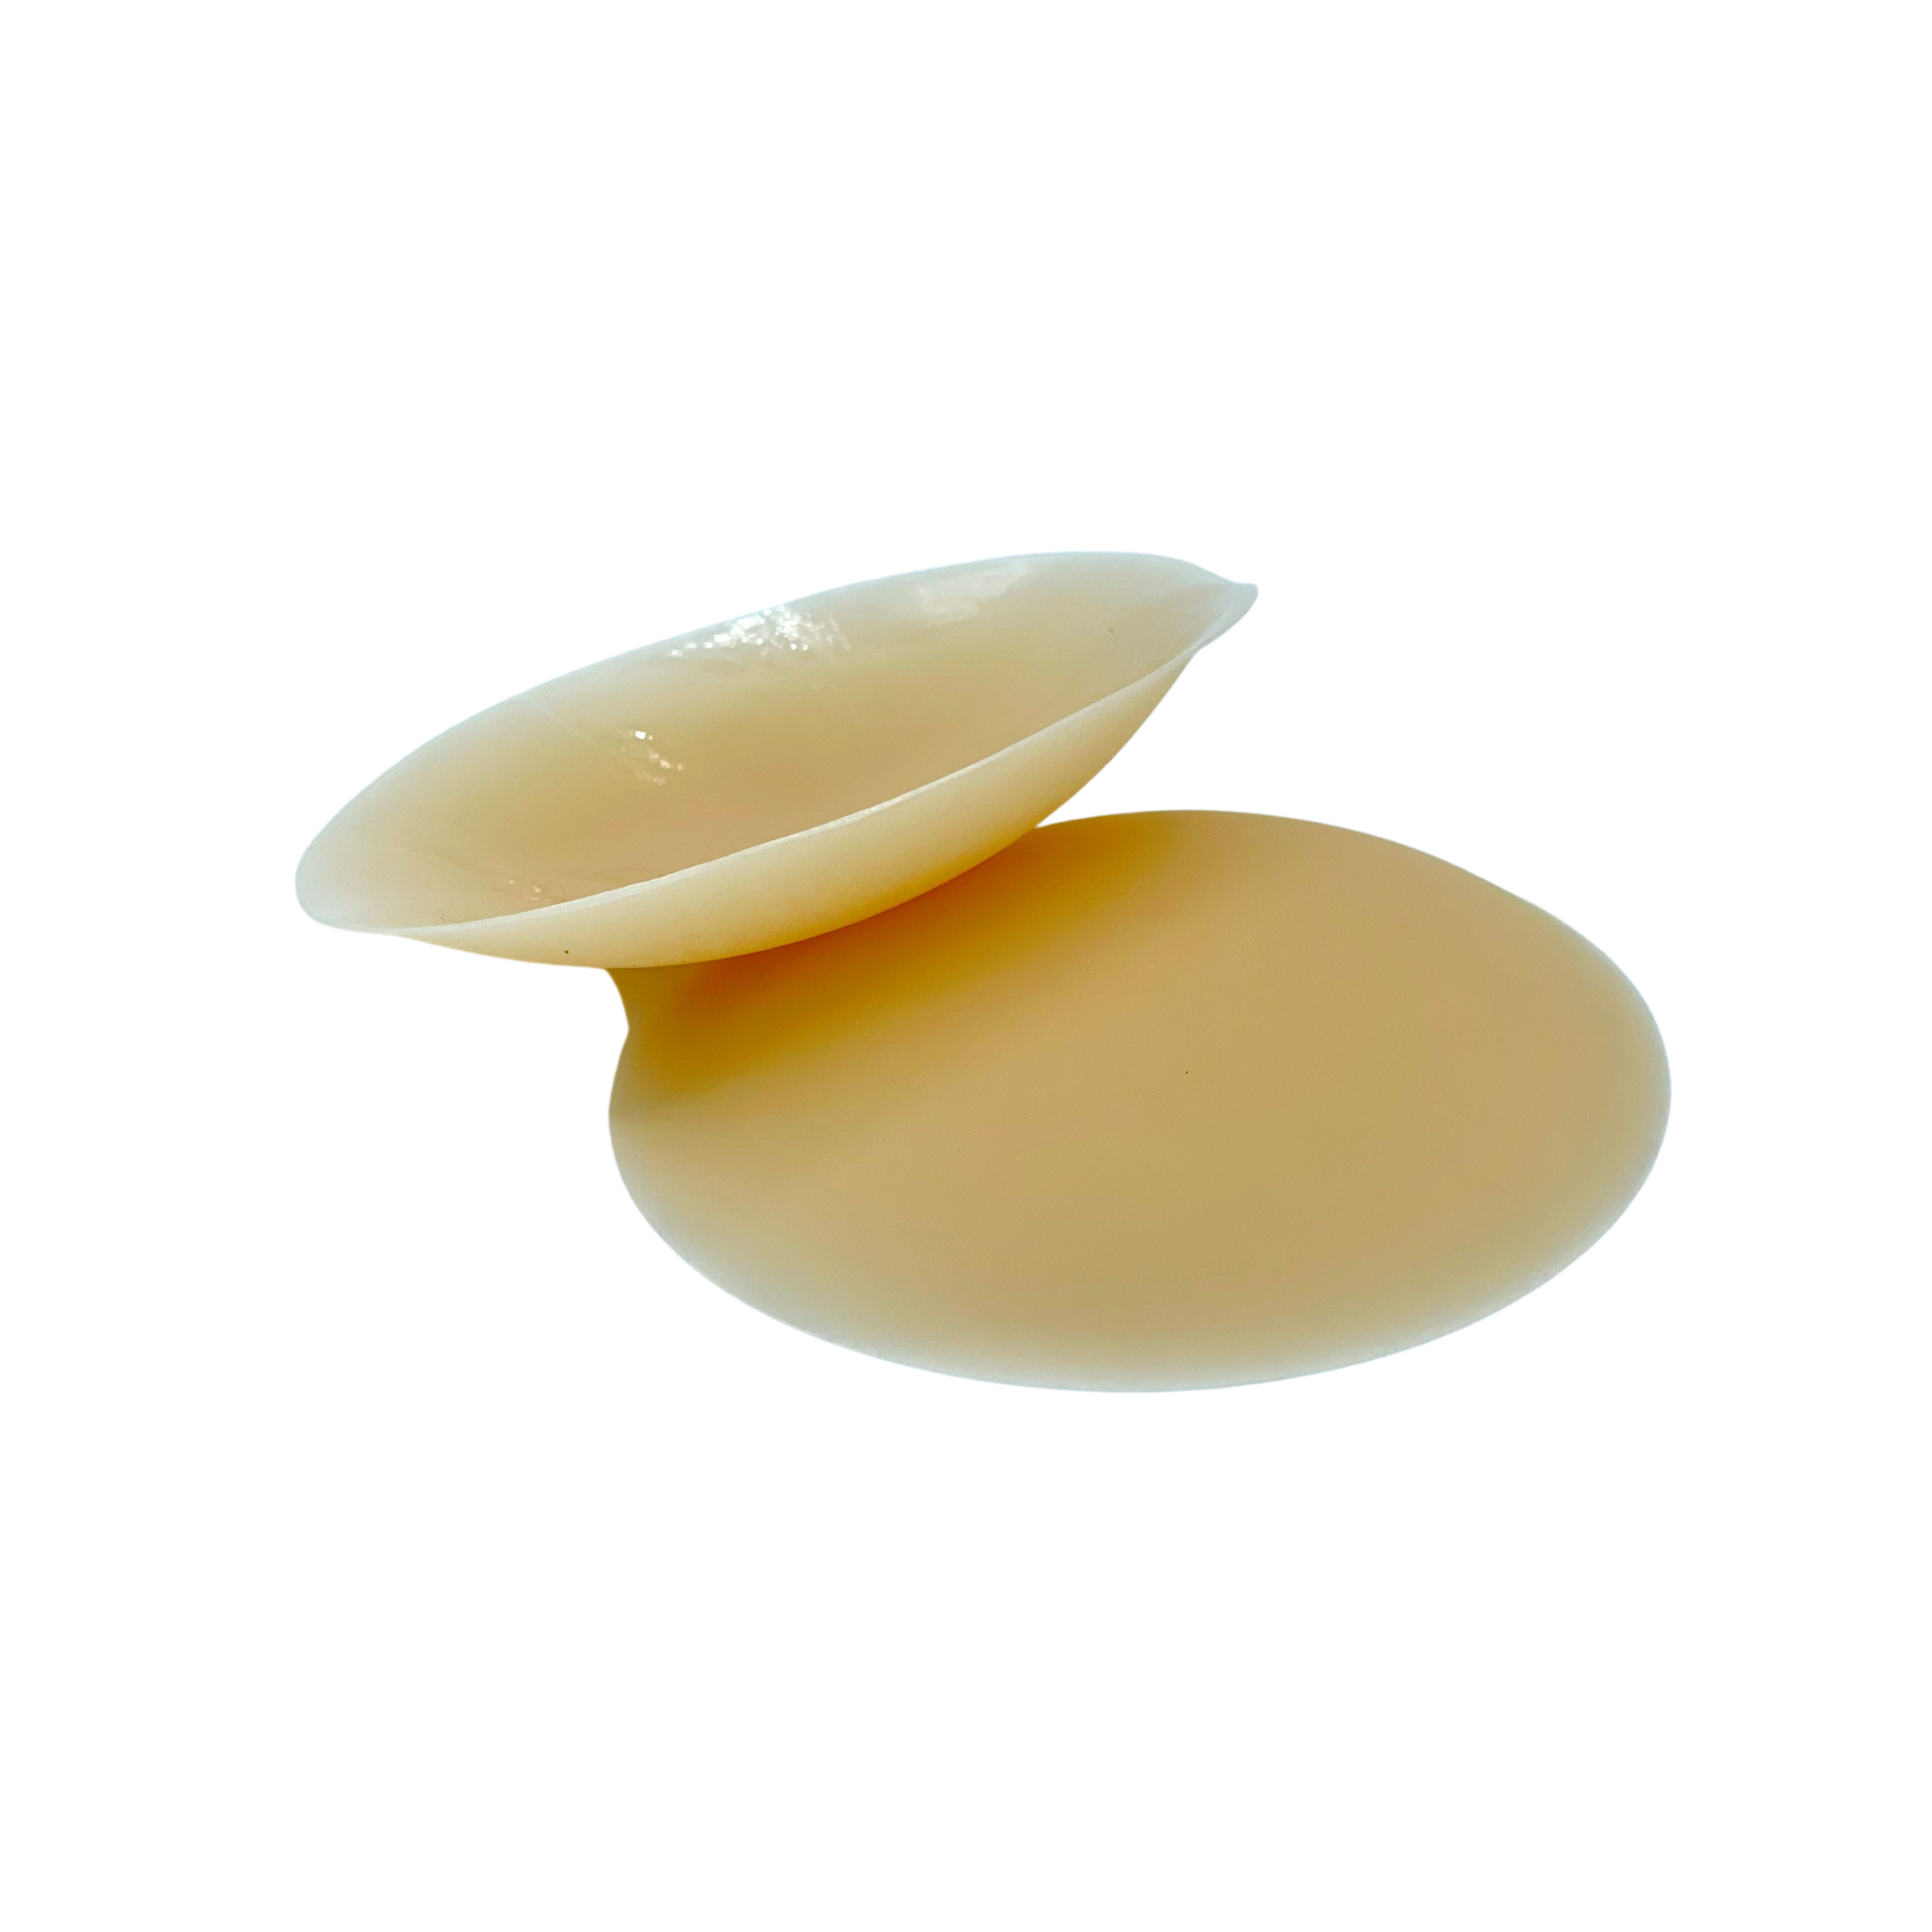 YOOBTAPE 8cm/3.15in Matte Silicone Nipple Covers - Sand